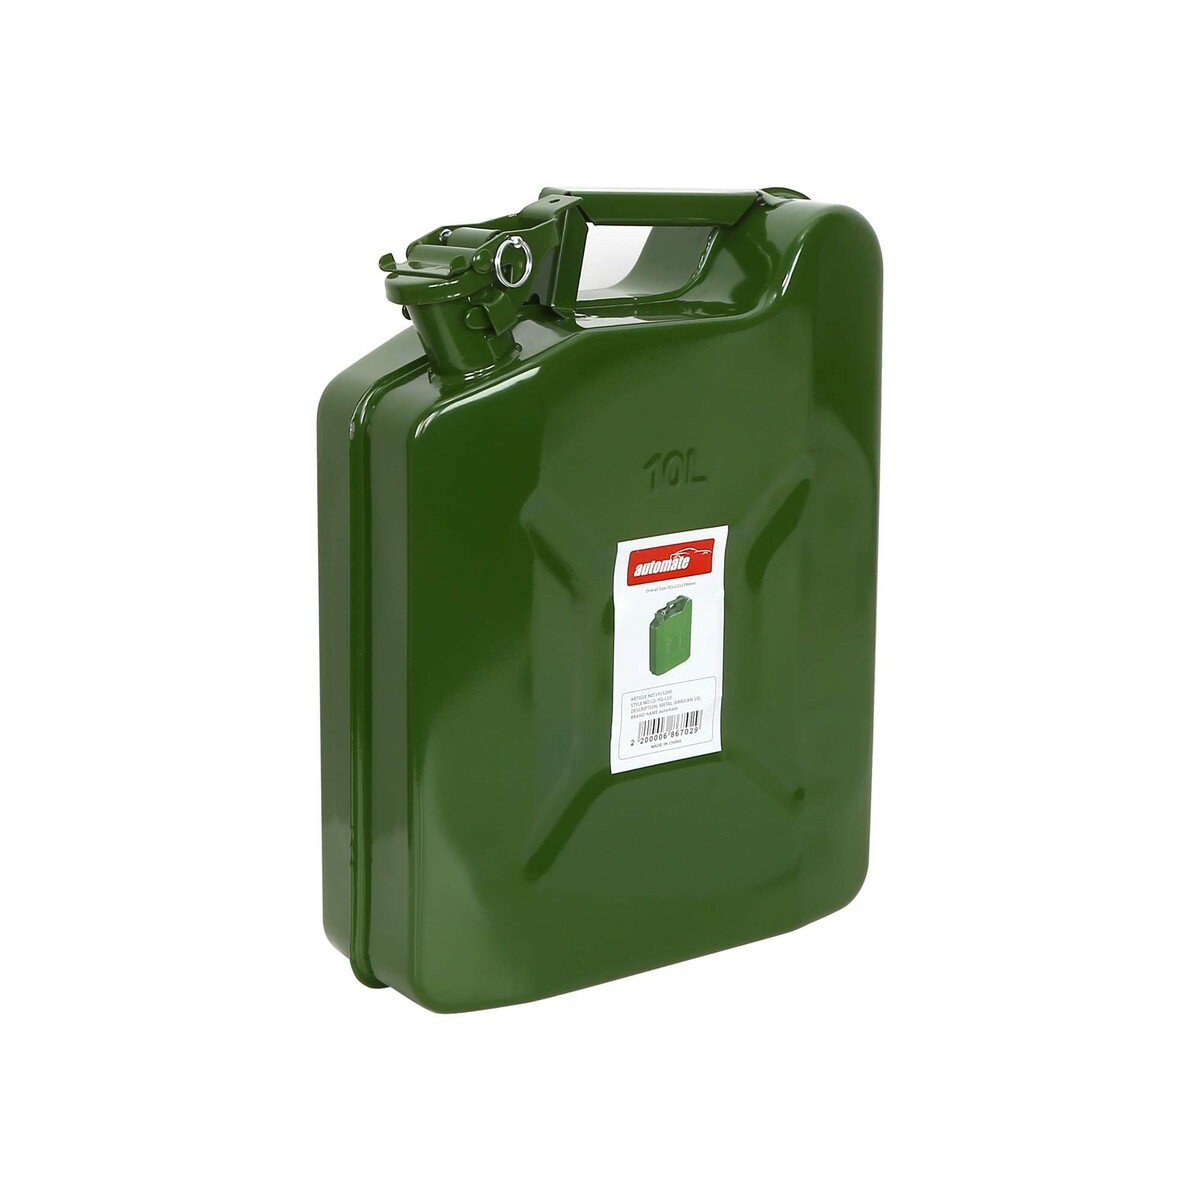 Automate Jerry Can Metal Vertical LDYGL 10Ltr